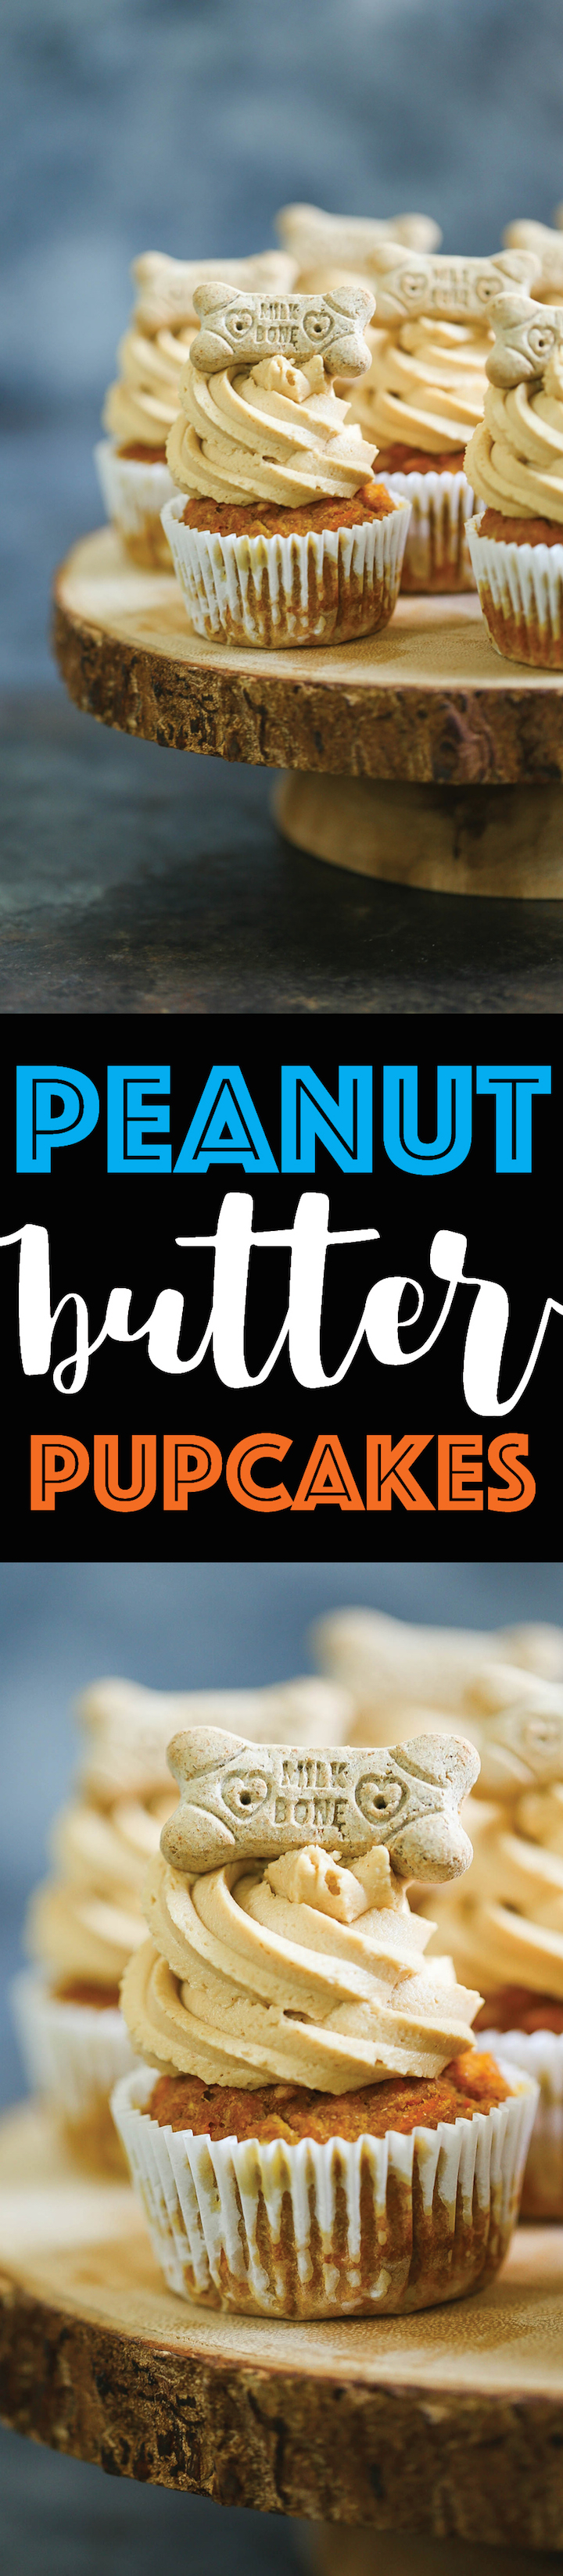 Peanut Butter Pupcakes - Treat your pup with these dog-friendly cupcakes filled with pumpkin, applesauce and carrots topped with a peanut butter frosting!